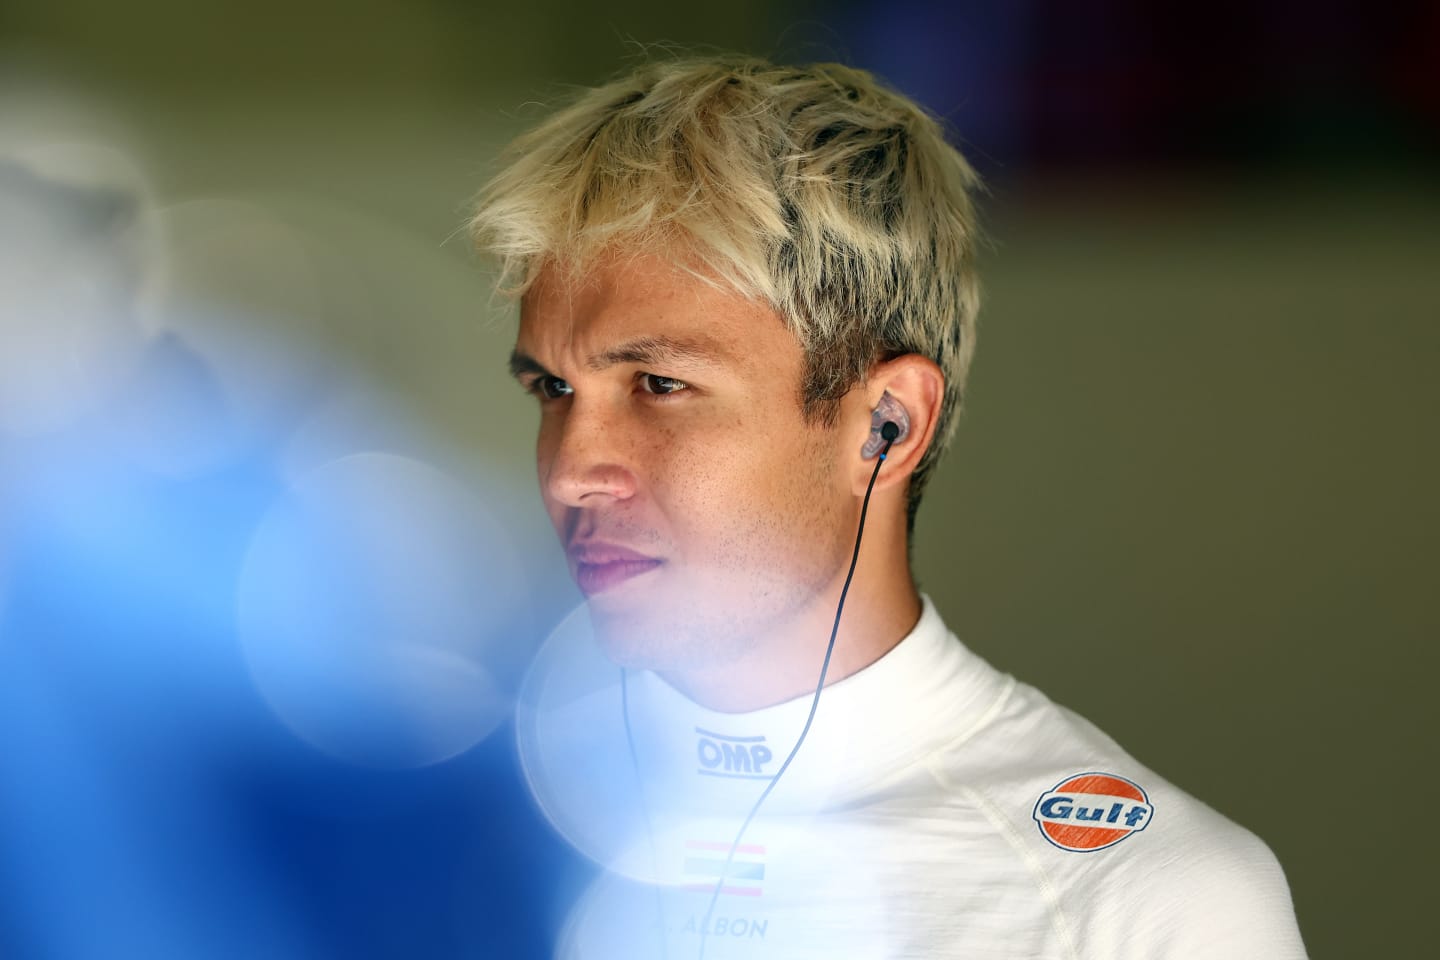 BAHRAIN, BAHRAIN - MARCH 04: Alexander Albon of Thailand and Williams prepares to drive in the garage during final practice ahead of the F1 Grand Prix of Bahrain at Bahrain International Circuit on March 04, 2023 in Bahrain, Bahrain. (Photo by Bryn Lennon - Formula 1/Formula 1 via Getty Images)